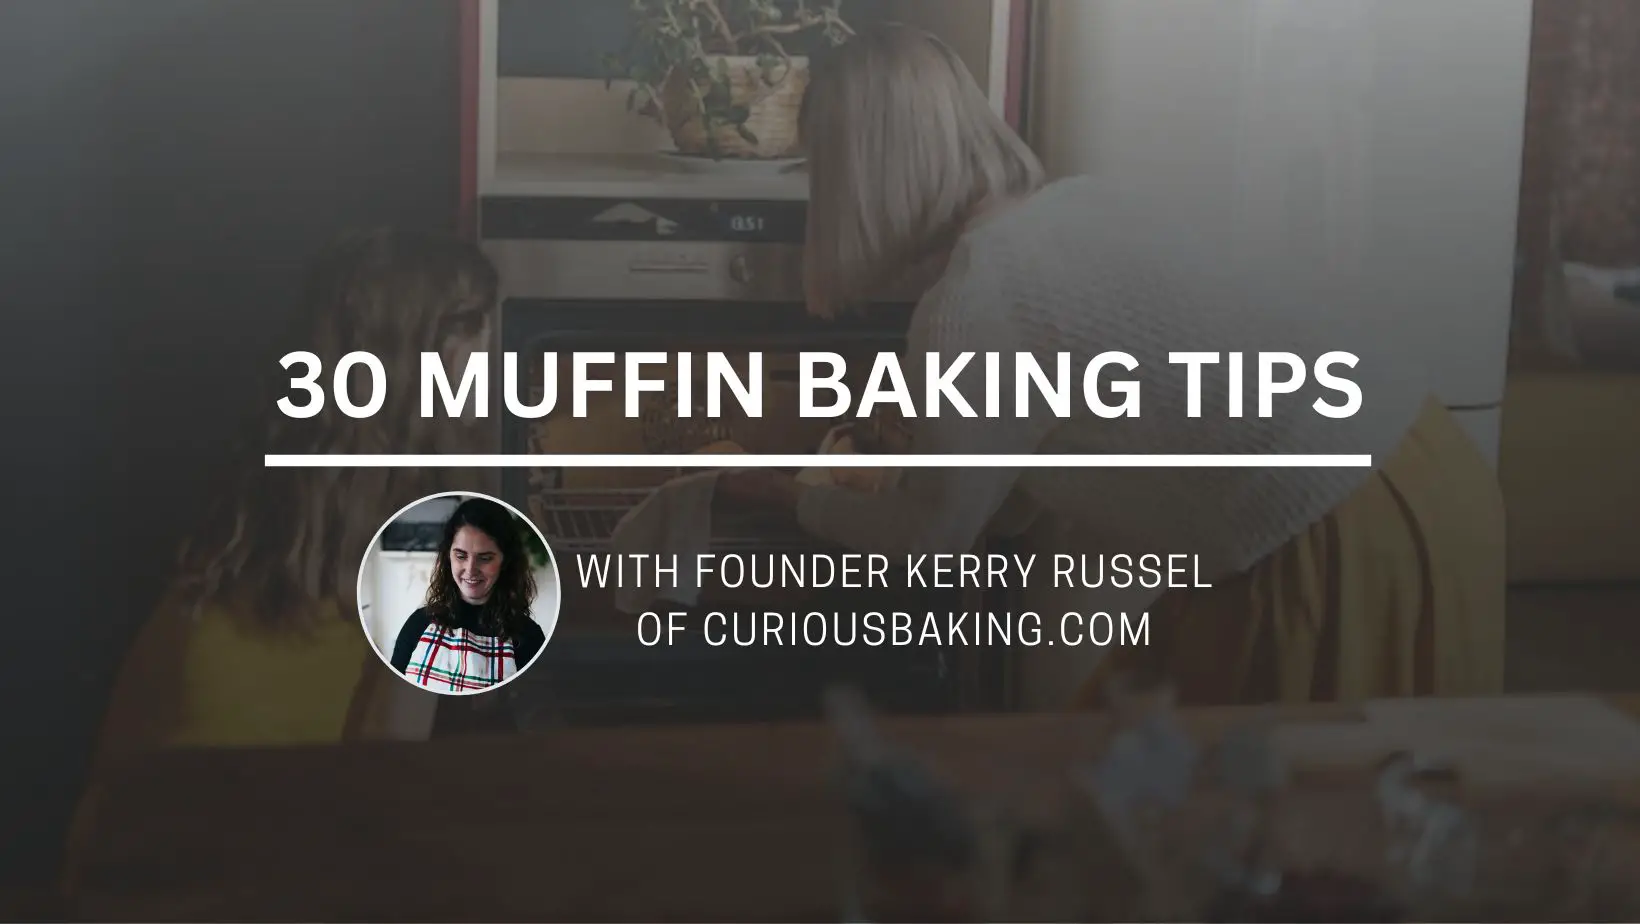 30 Muffin Baking Tips by CuriousBaking.com